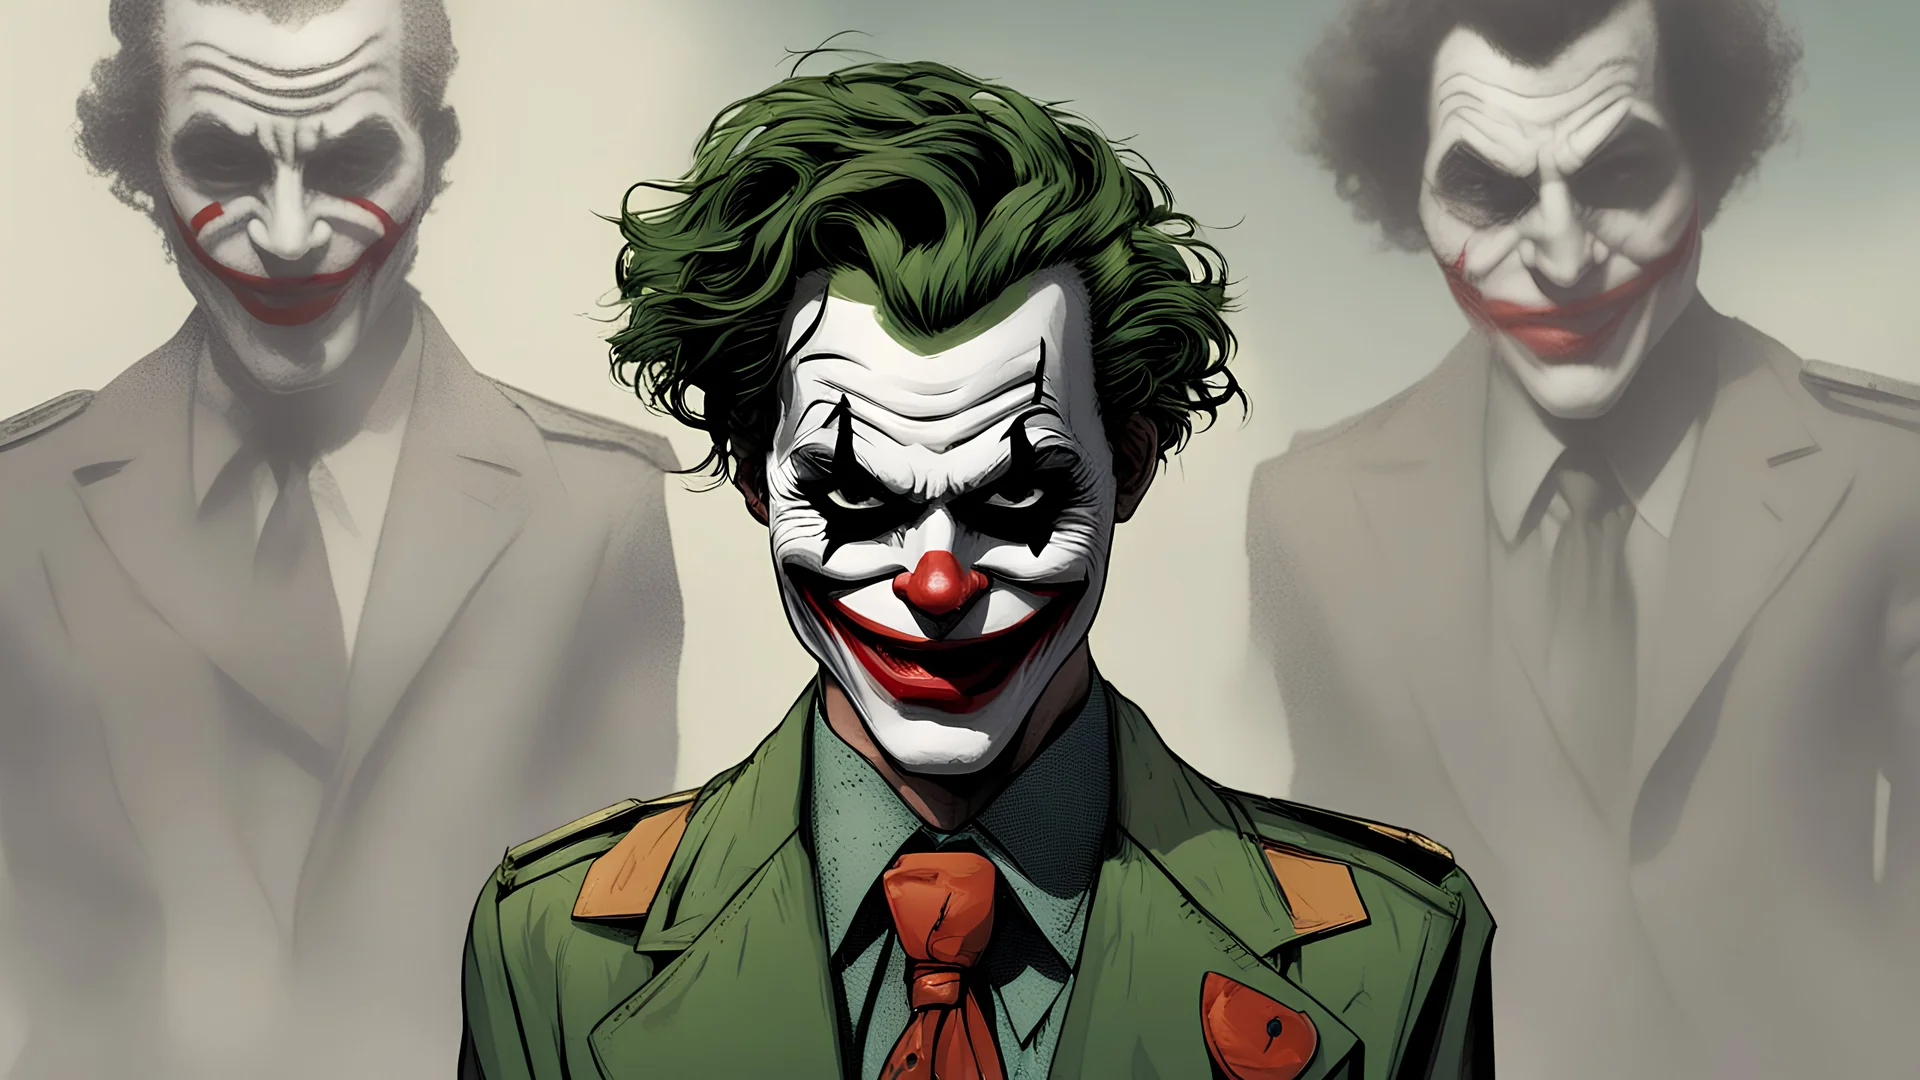 The spy, the joker mask, the Sudanese army